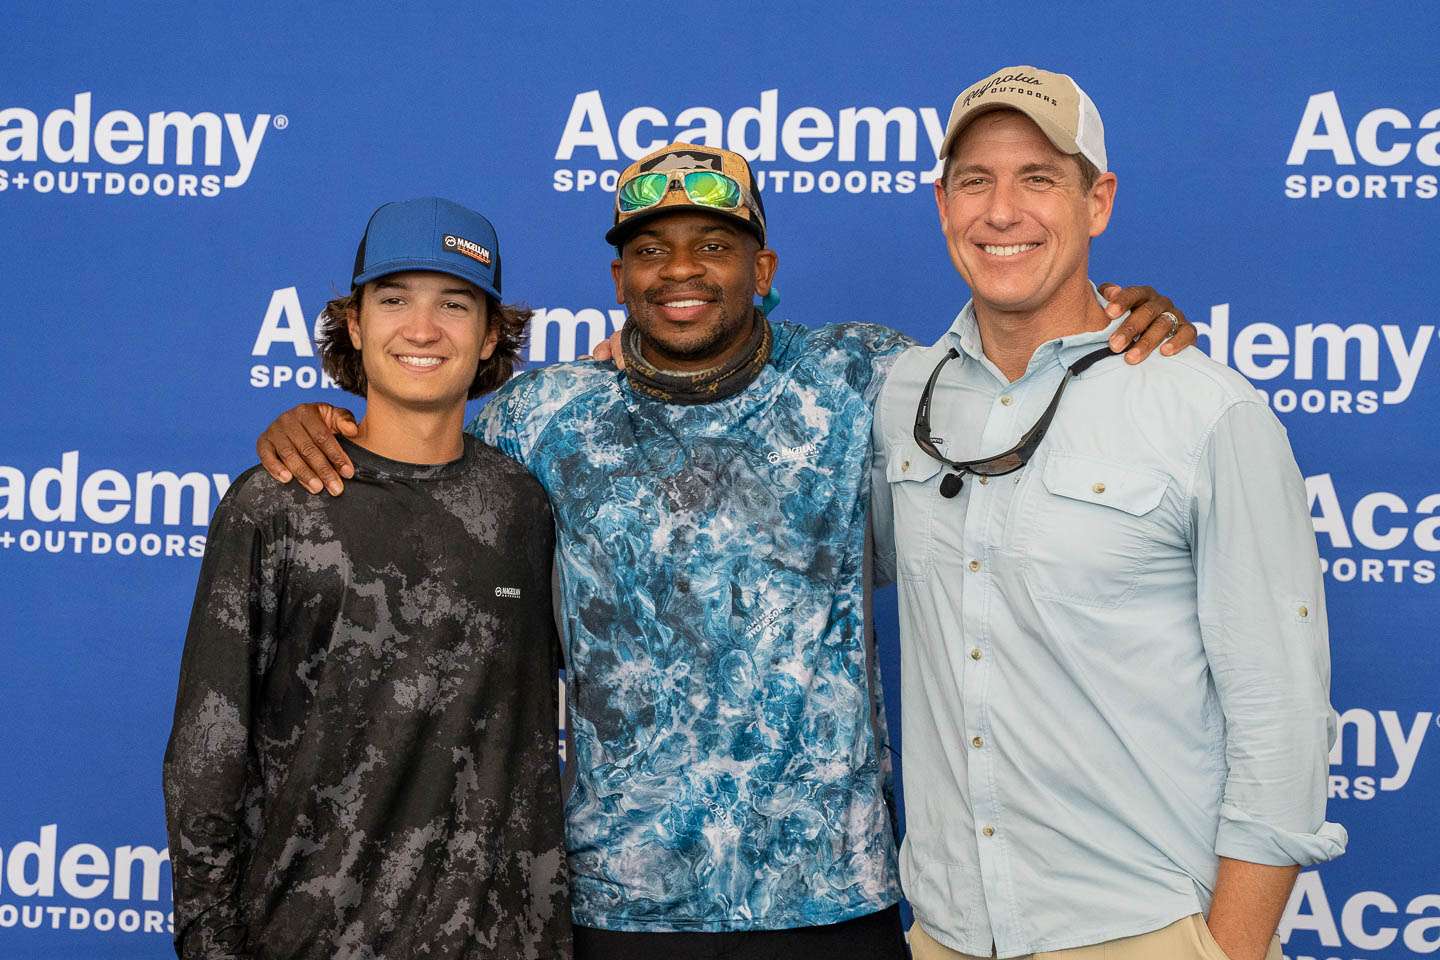 Also competing were Tucker Smith, country music star Jimmie Allen and meteorologist Reynolds Wolf. 